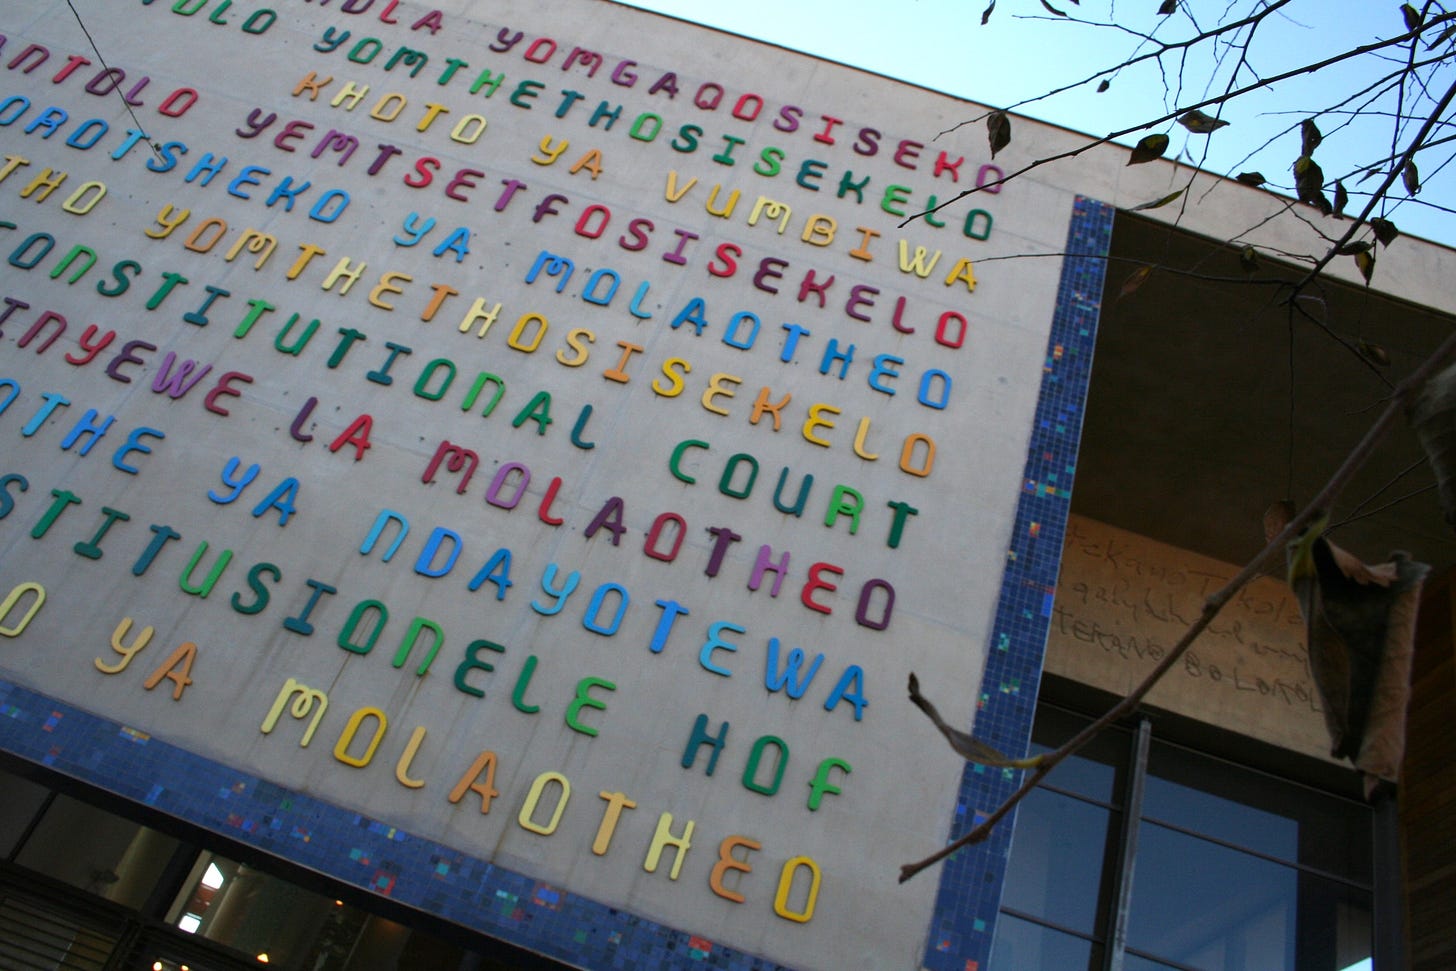 South African Constitutional Court exterior wall where the words “Constitutional Court” are written in the 11 official languages of South Africa. Author Photograph. July 2, 2022.